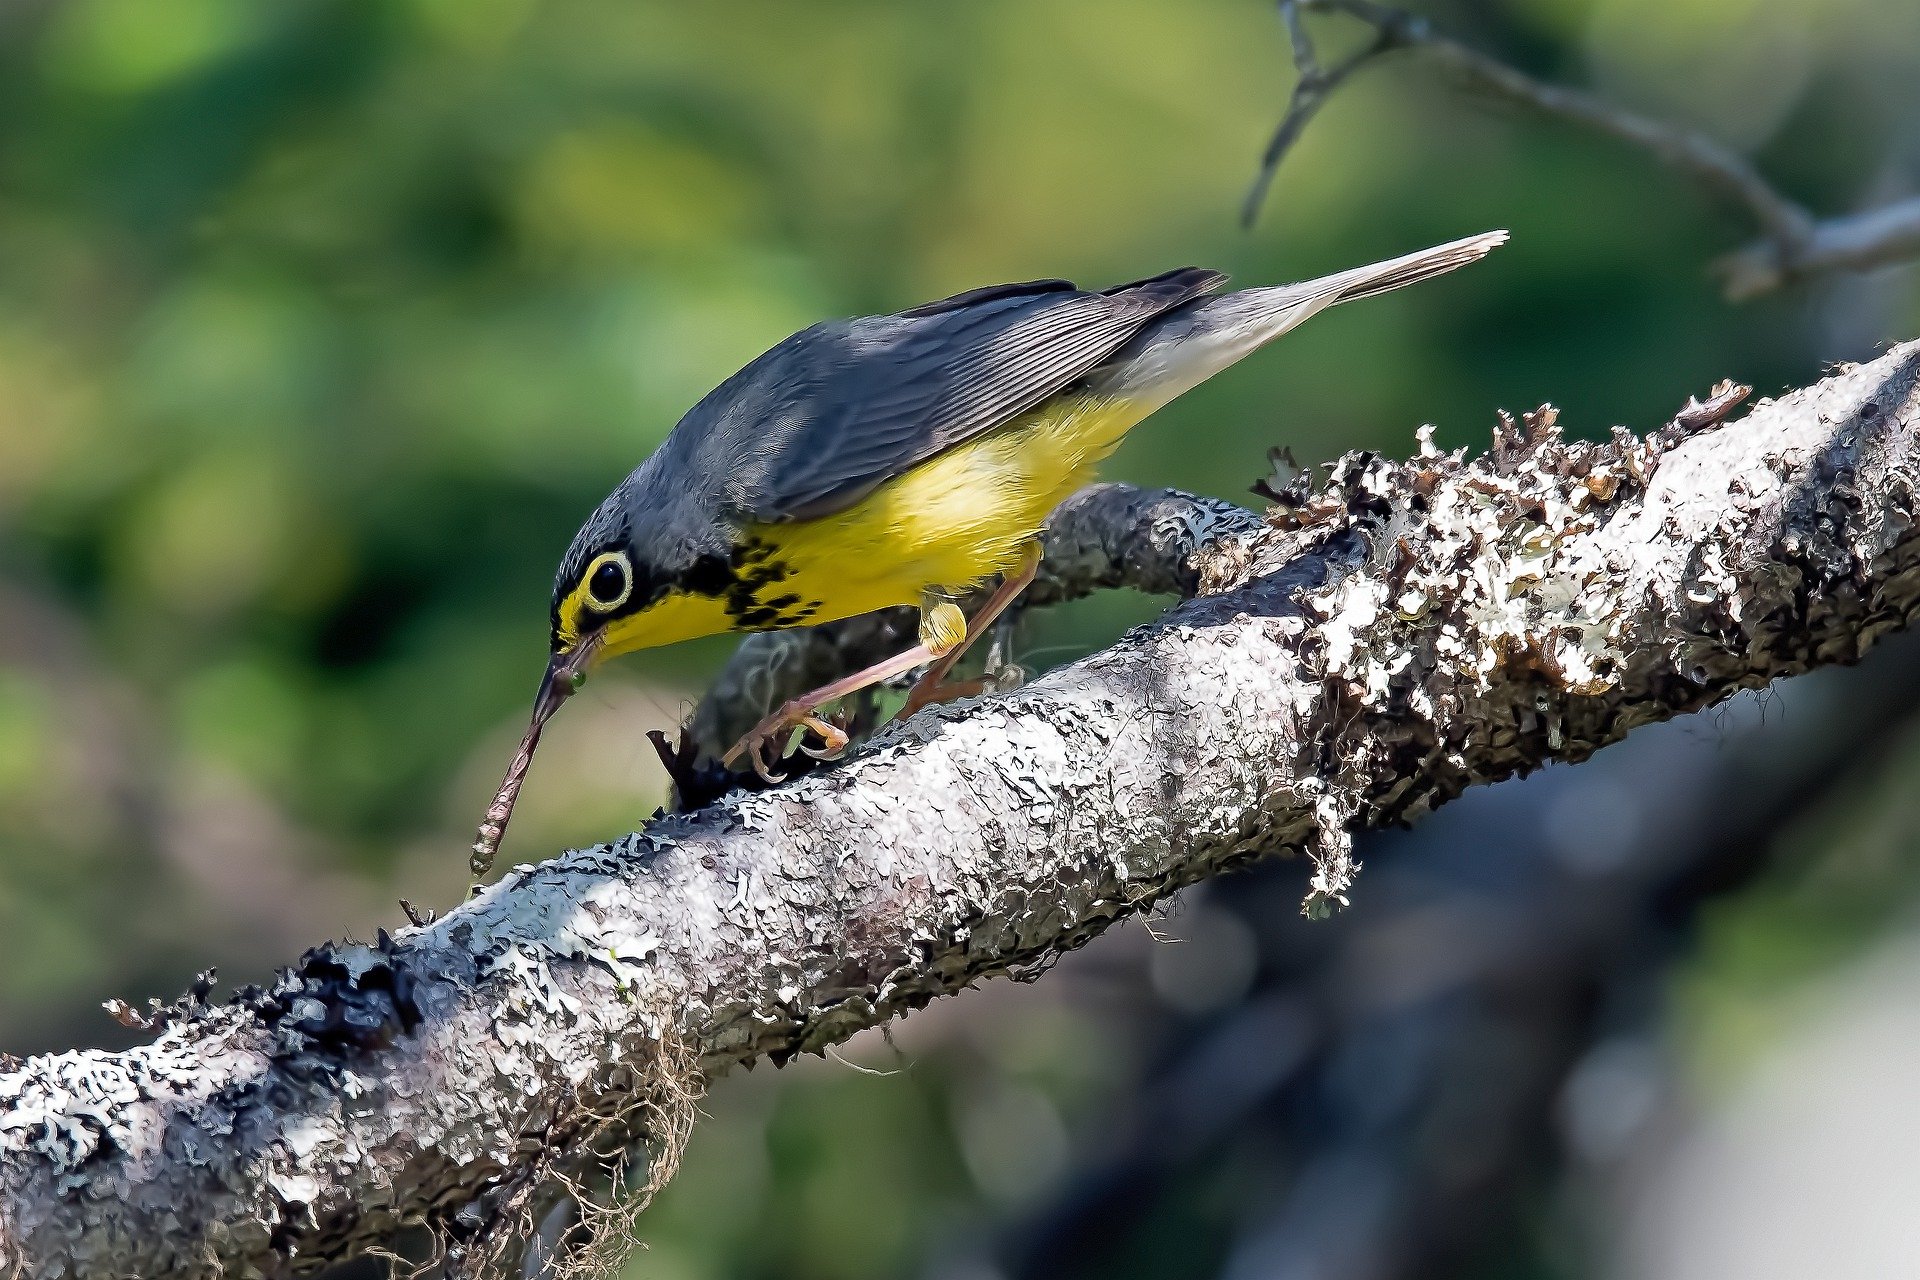 A Canada warbler extracts it's worm meal from a tree branch.